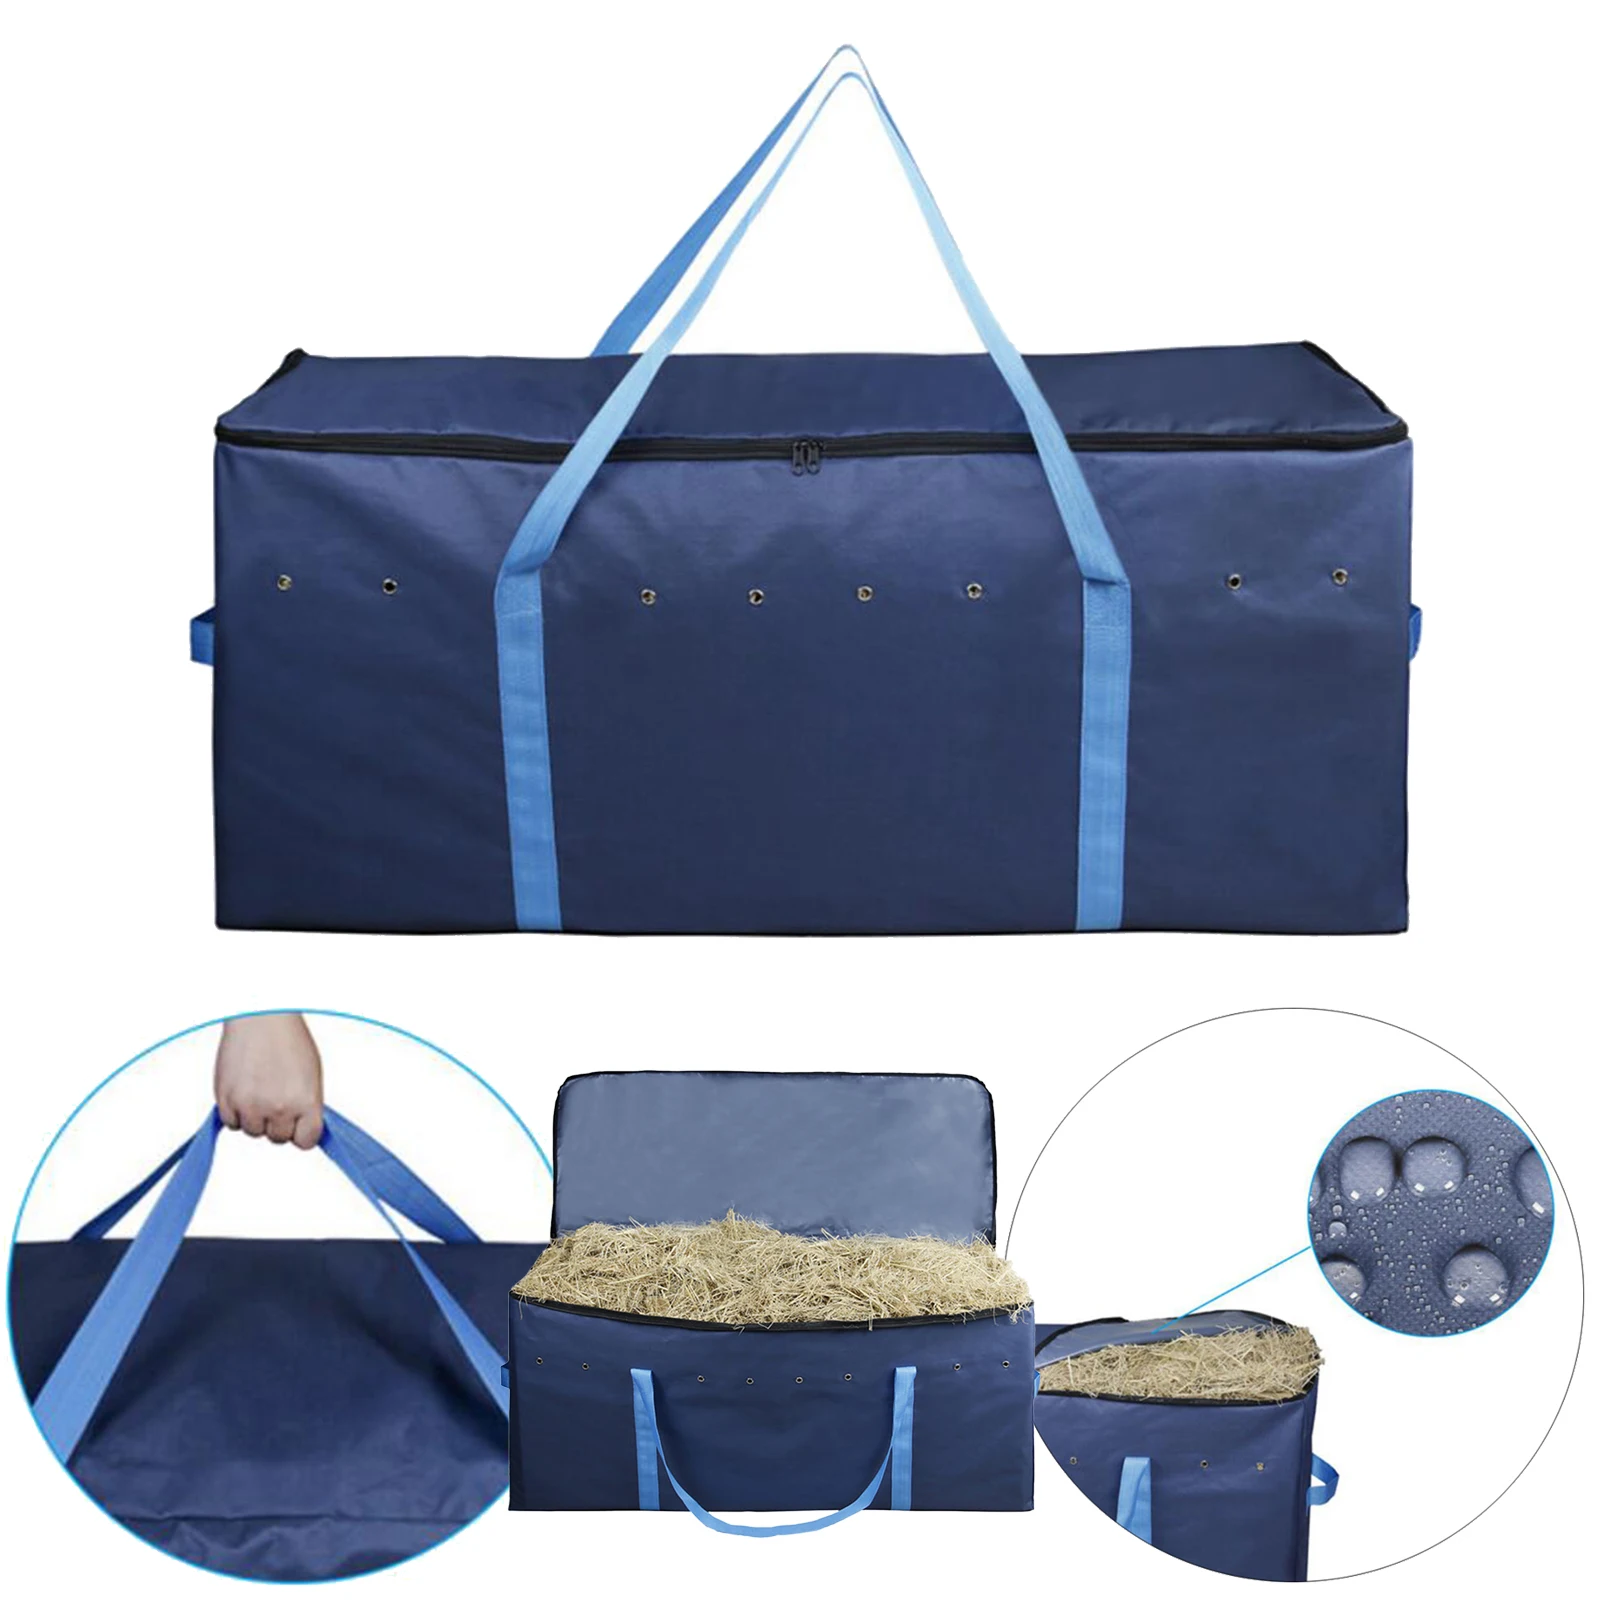 Foldable Large Hay Bale Carry Bag Zipper Tote 600D Oxford Cloth Waterproof